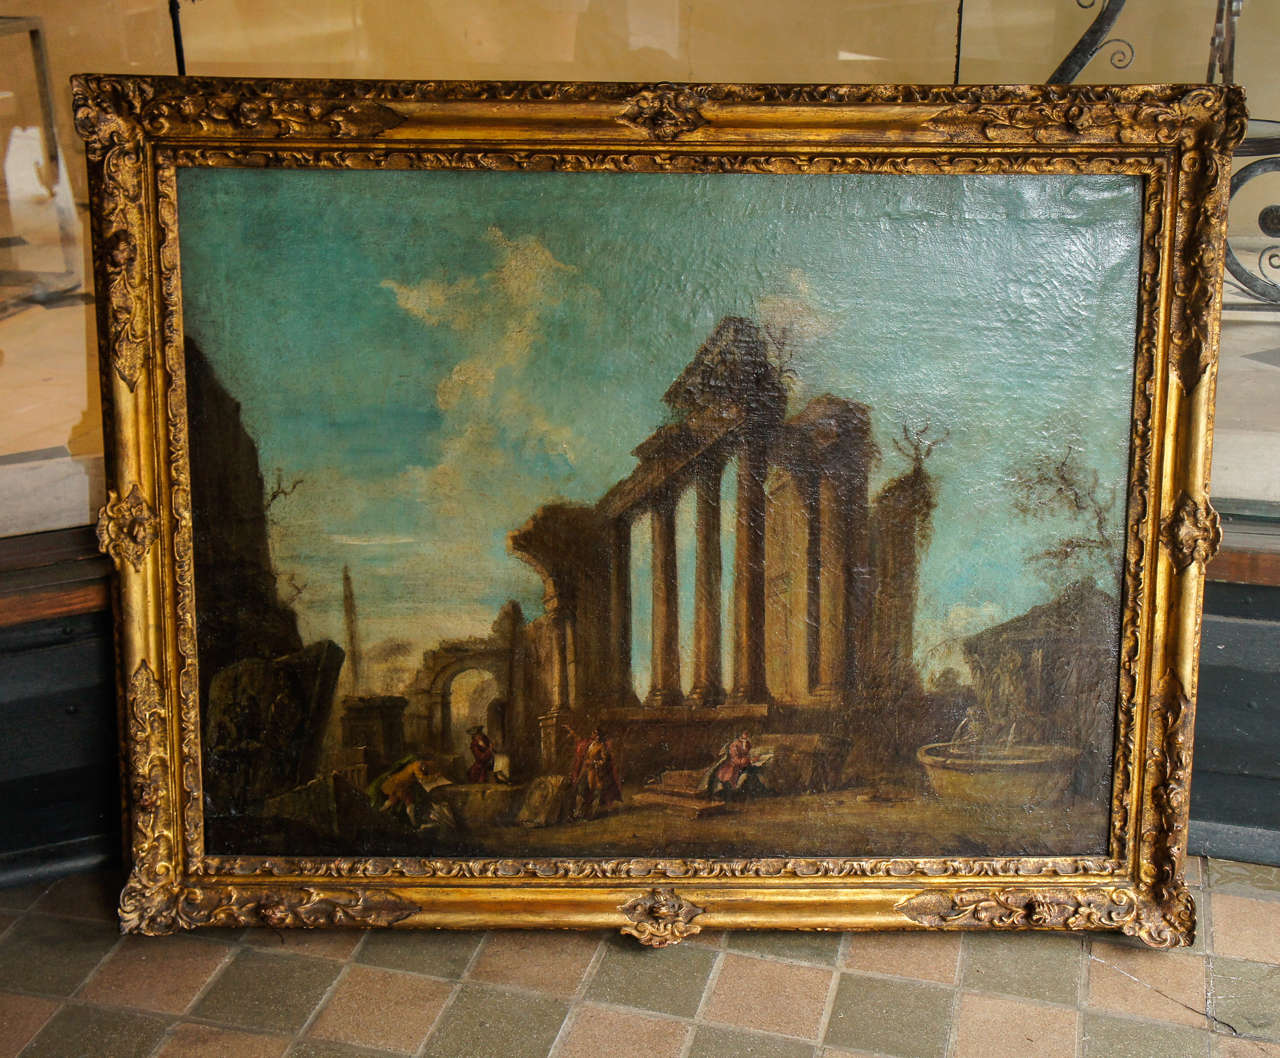 This fine old painting is a typical pastiche of the kind popular throughout Italy and the world in the 17th, 18th and 19th centuries. The most commonly associated artist who really made the largest name for himself creating these kinds of paintings